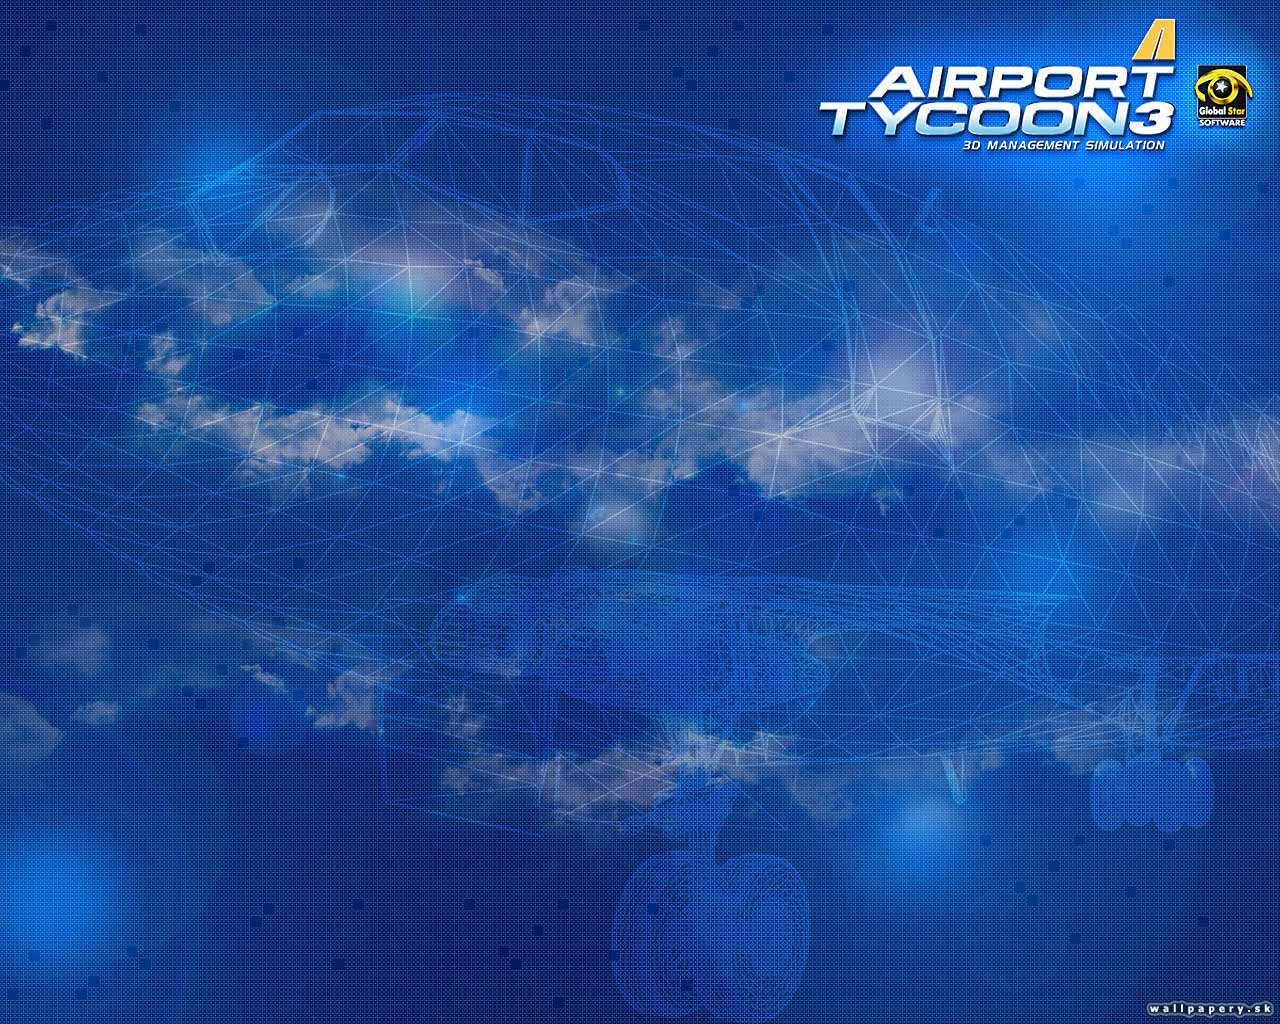 Airport Tycoon 3 - wallpaper 2